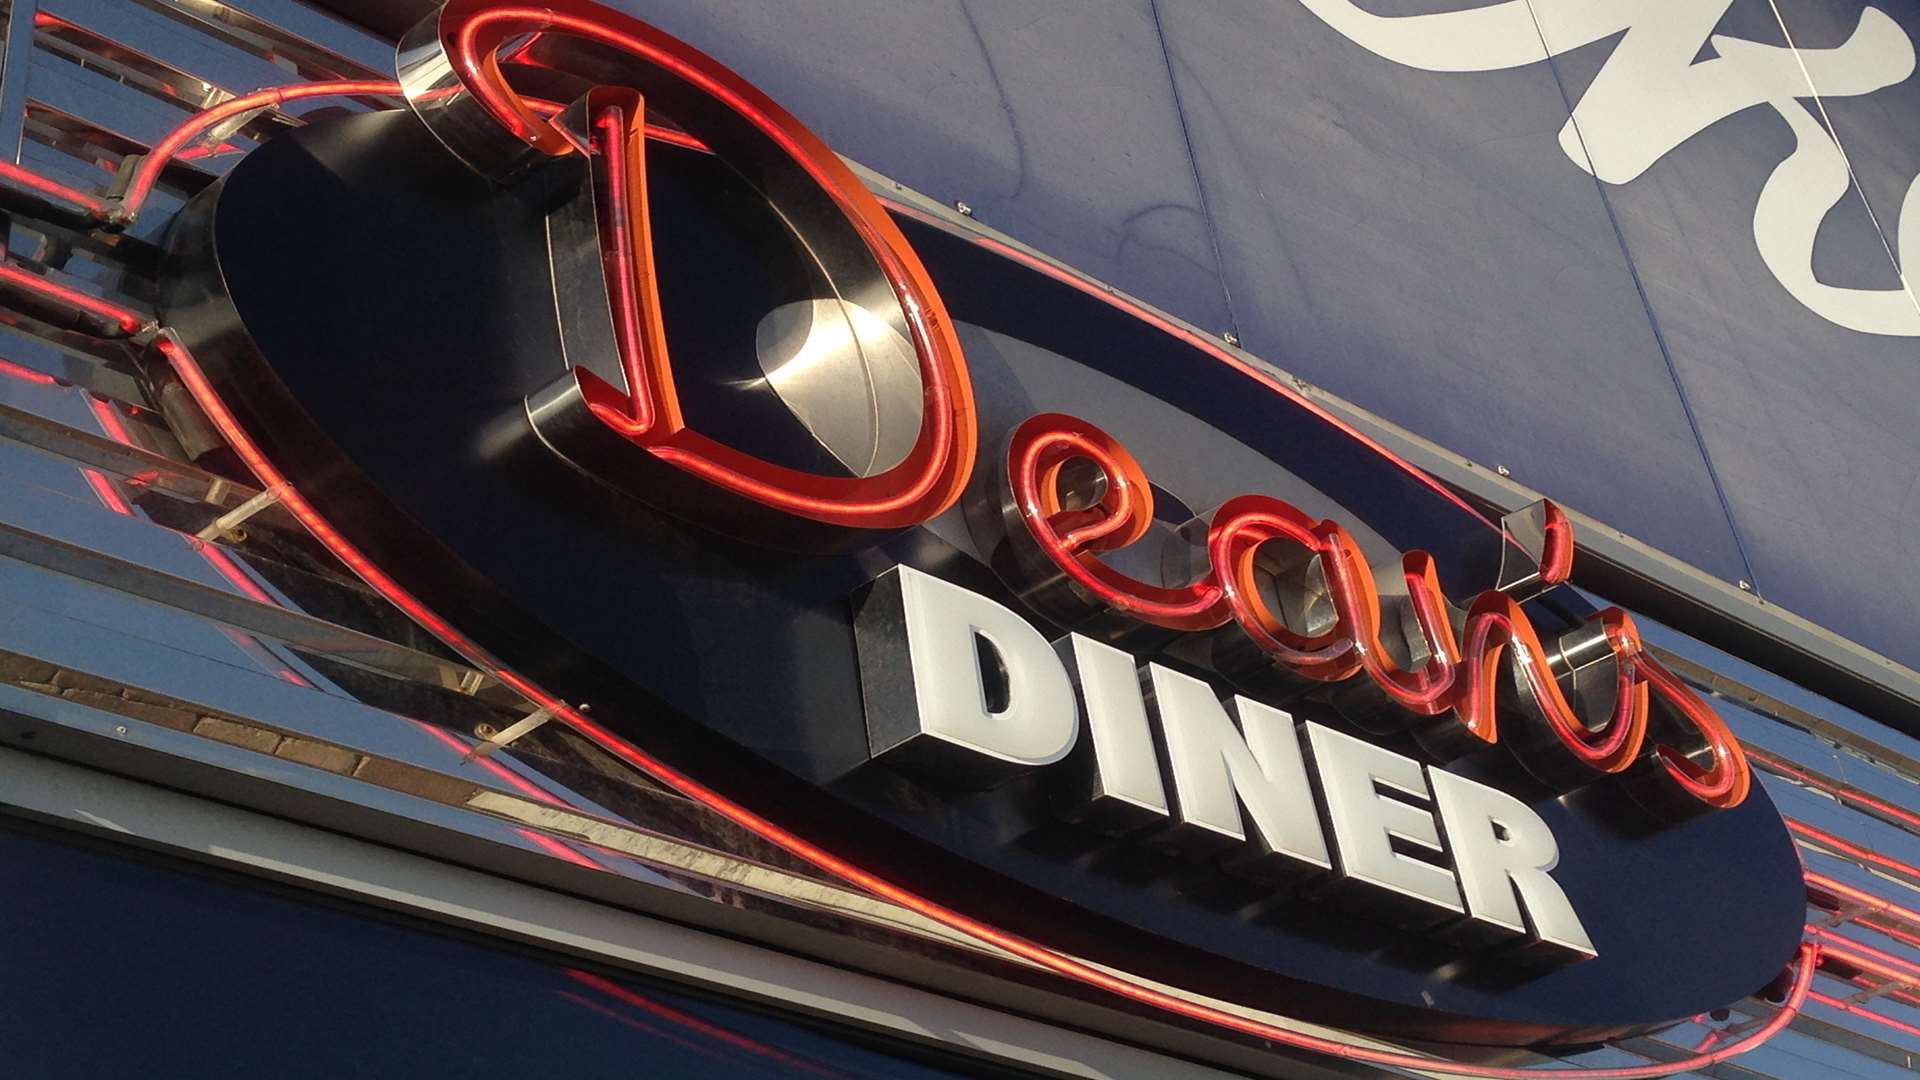 Dean's Diner is the latest to sign on the dotted line with Hempstead valley